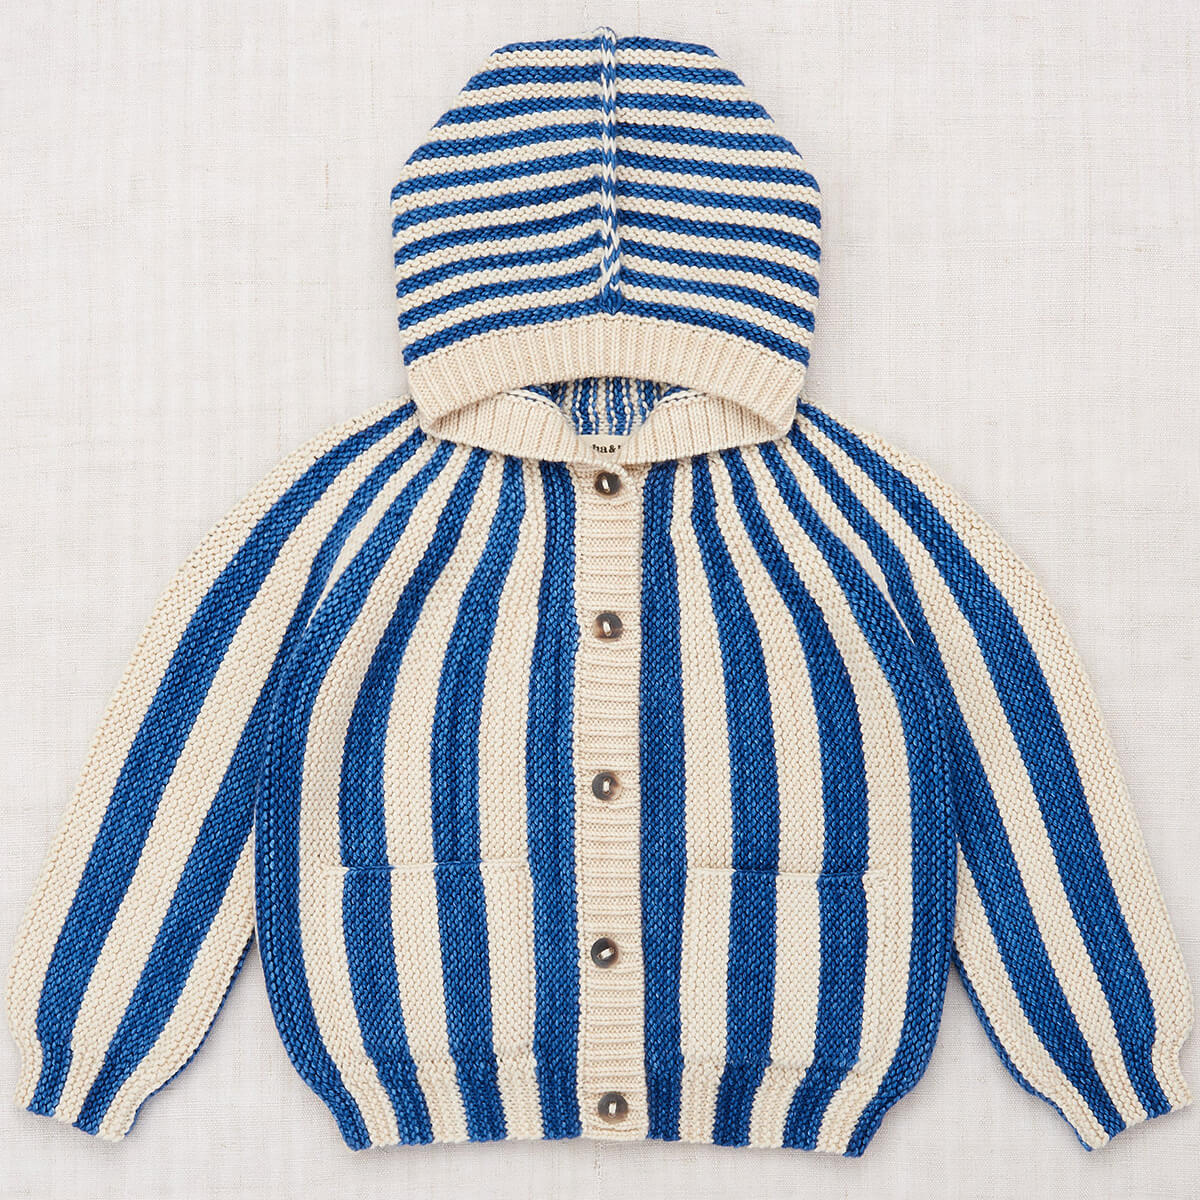 Circus Stripe Hooded Cardigan in Blueberry by Misha & Puff